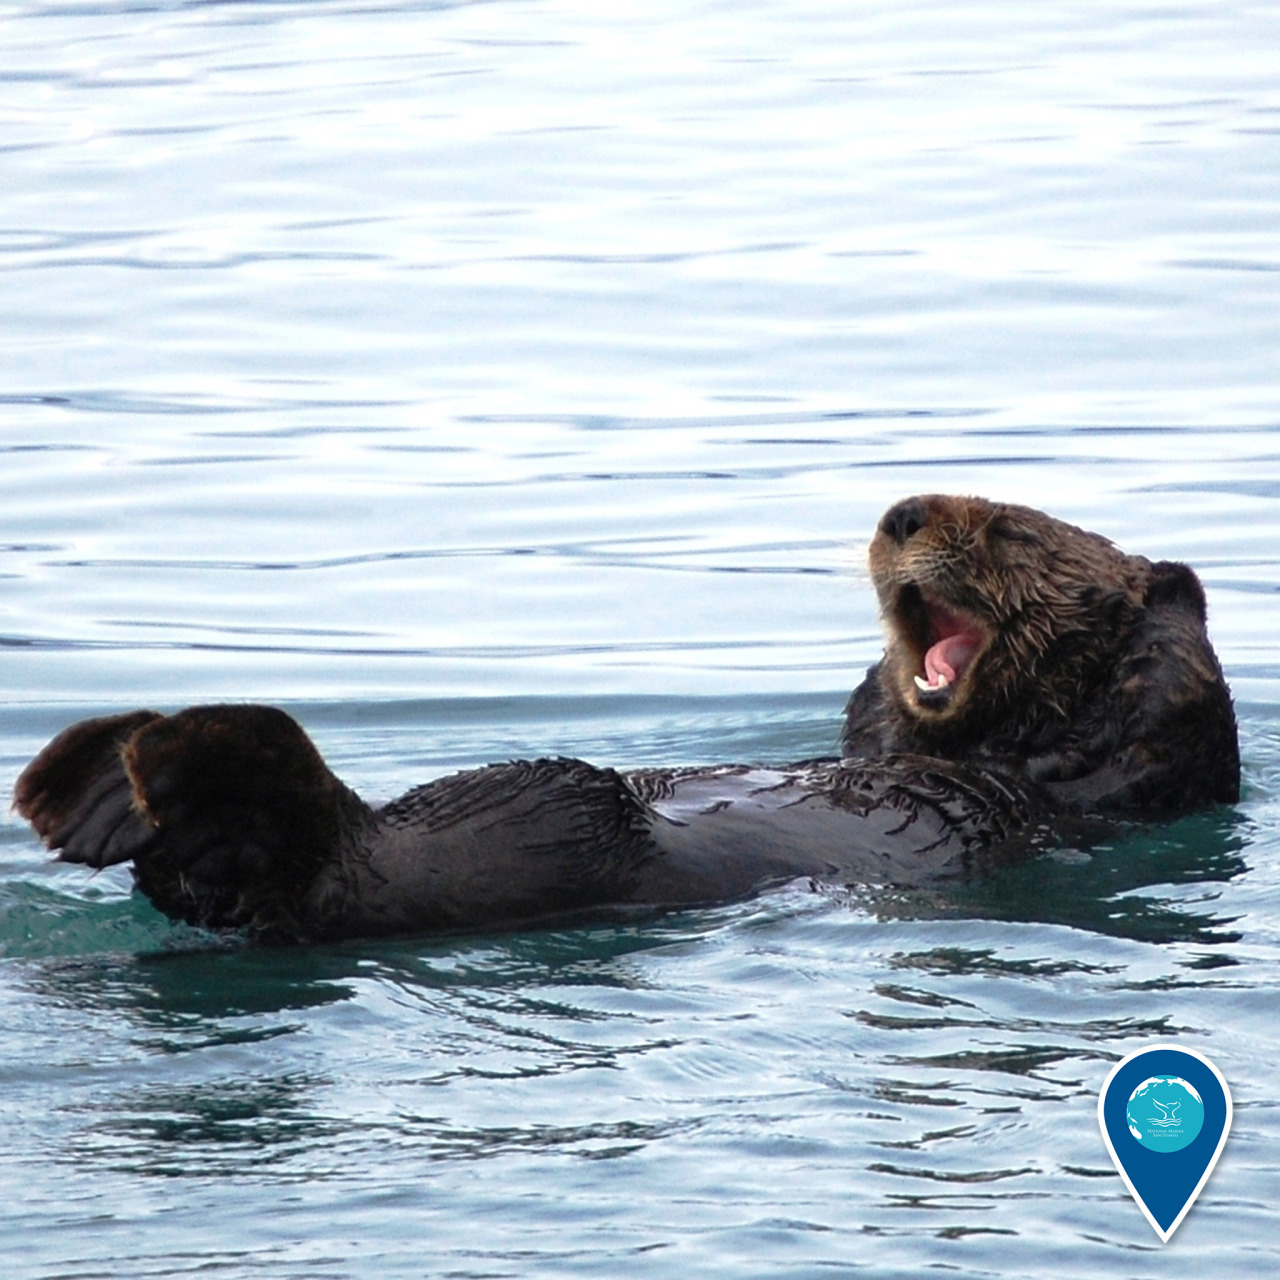 Success for the sea otter!Sea otters were once locally extinct from the Washington coast, but in 1969 and 1970, 59 sea otters were relocated there from Alaska. These otters have thrived: today more than 1,800 individuals call the Washington coast...